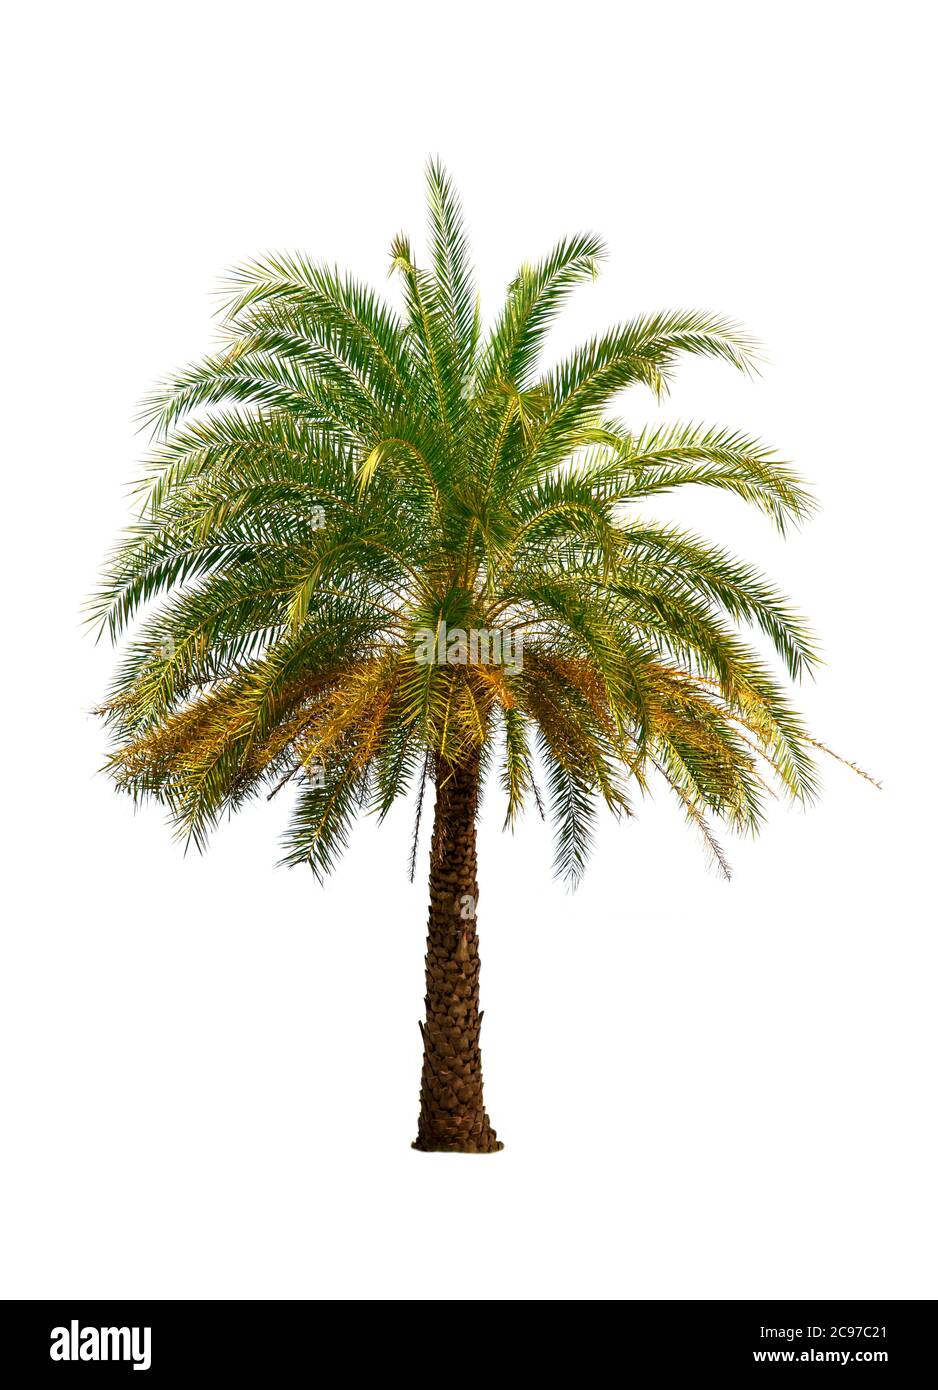 The Betel nut tree isolated on white background. Environment concepts. Stock Photo